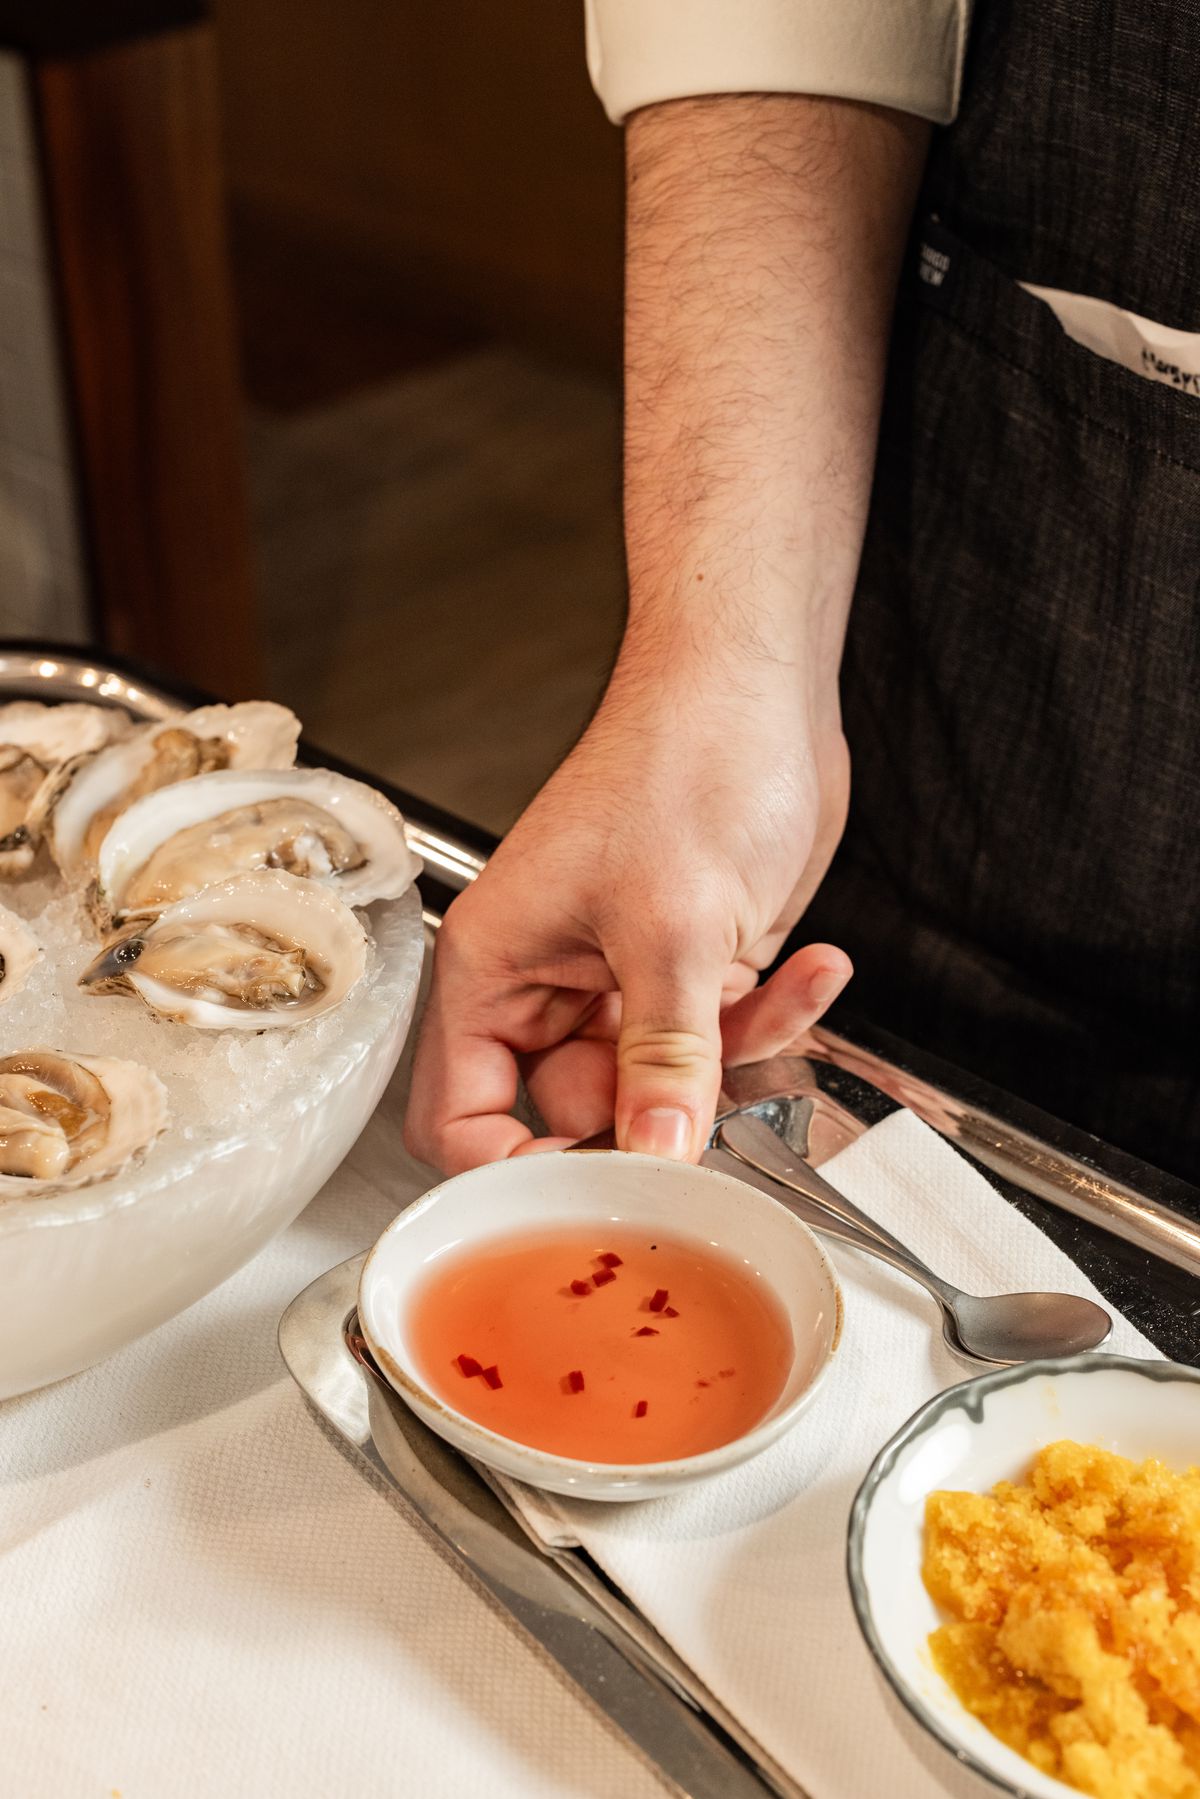 A man’s hand holds a bowl of chili sauce. To the right is a frozen ganache. To the left is a bowl of iced, opened oysters.